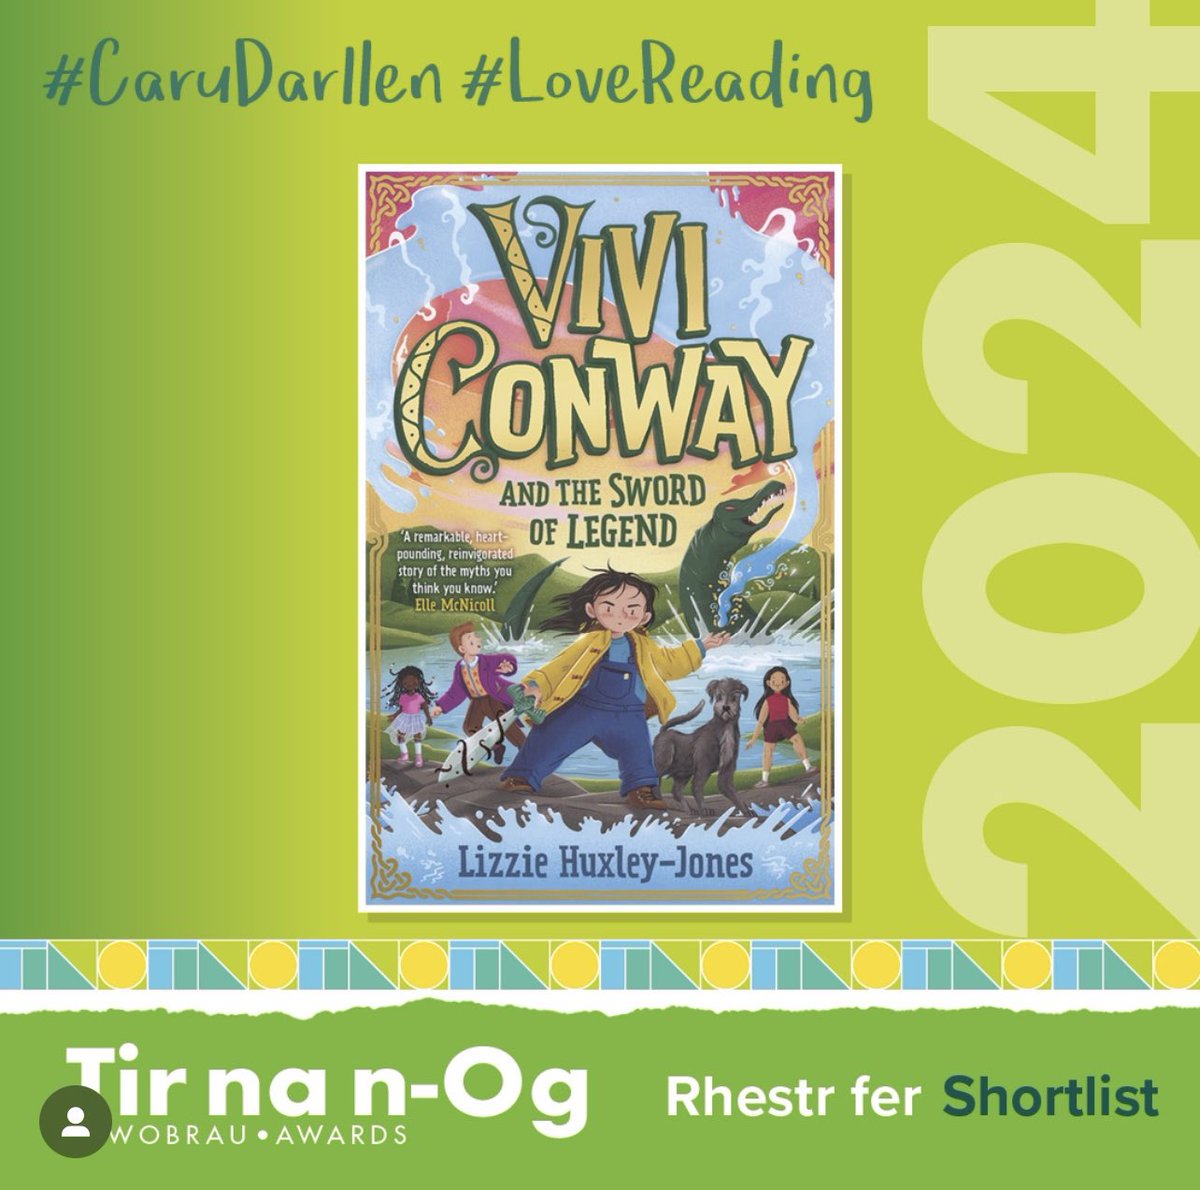 What a wonderful end to the week, Vivi Conway and The Sword of Legend has been shortlisted for the 2024 Tir na n-Og Awards @Books_Wales 

A massive congratulations to @littlehux ⚔️💚

#TNNO2024 #lovereading